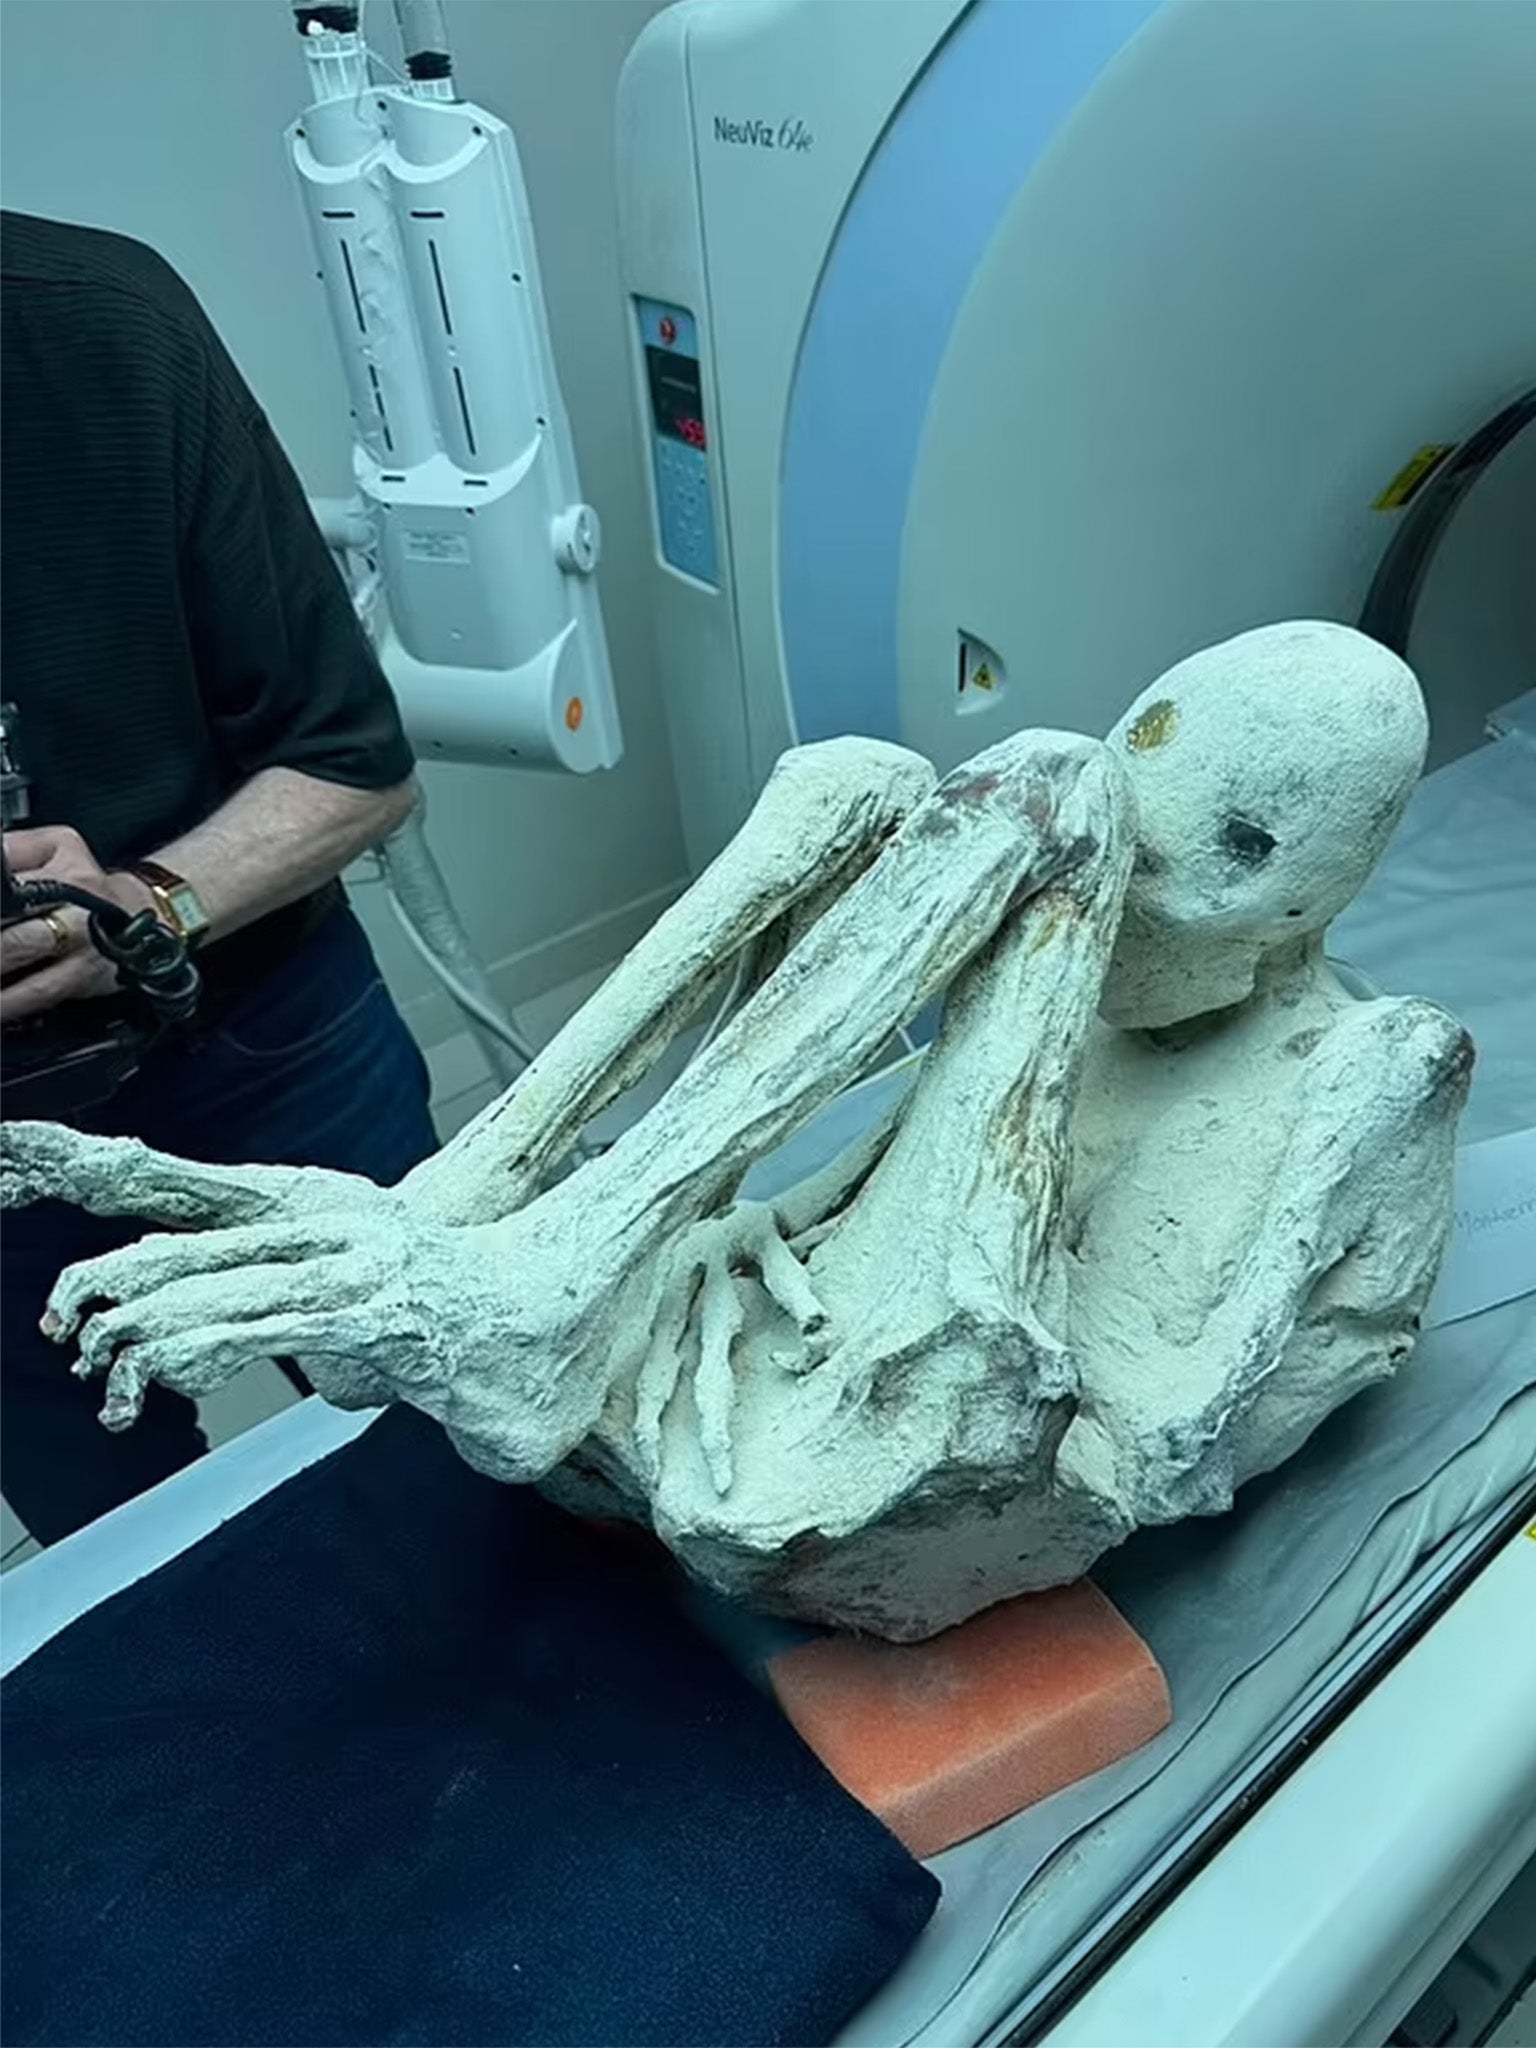 bizarre case of peru alien mummies takes another turn as officials raid ‘pregnant specimen’ press conference